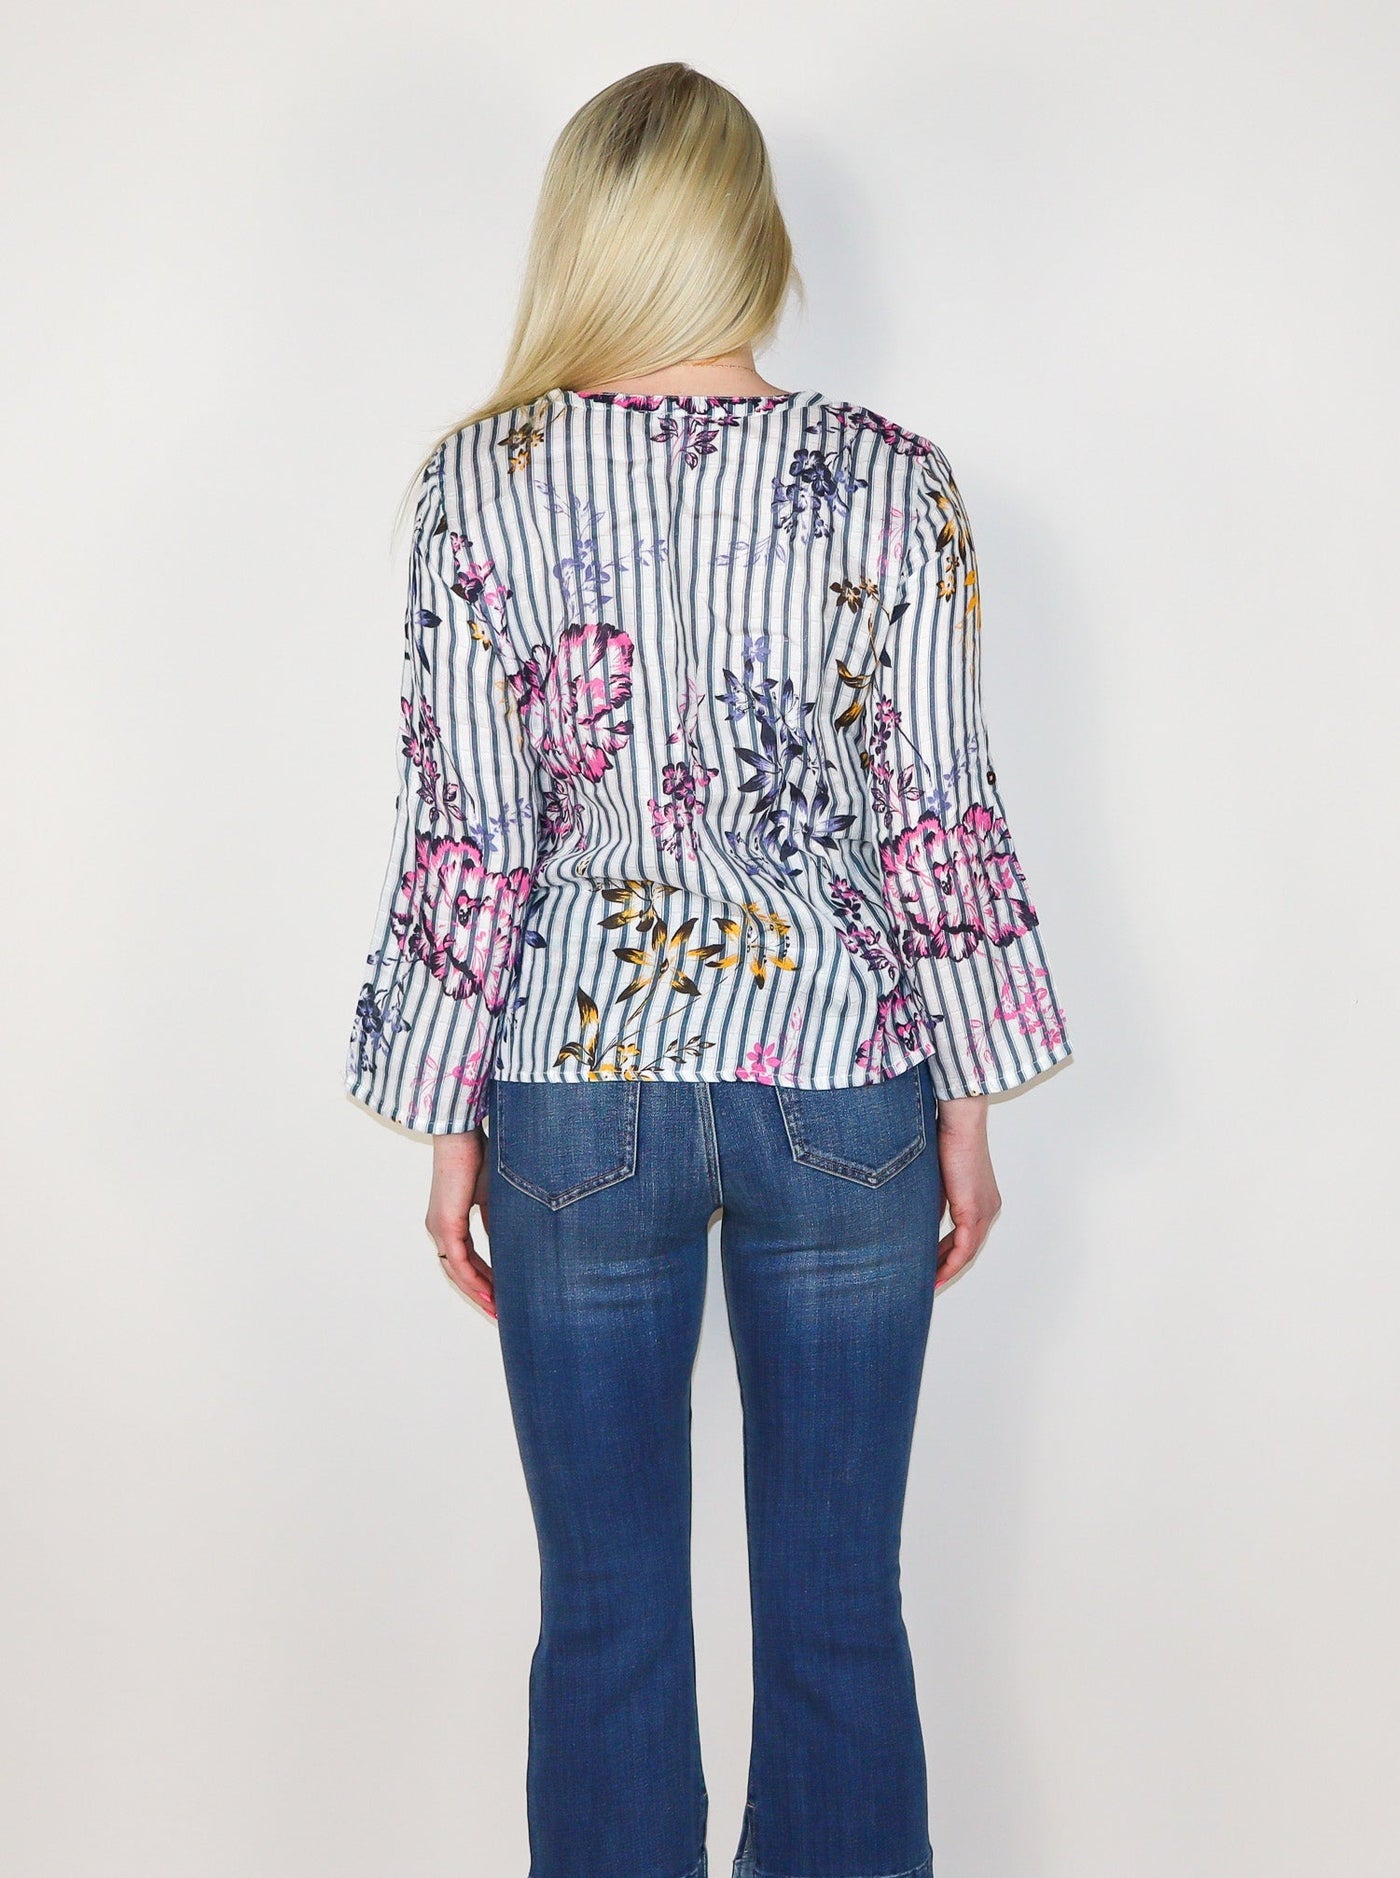 Model is wearing a vertical striped long sleeve blouse with multi color floral detail. The blouse has a string on the neckline for a bowtie detail. Blouse is paired with blue jeans.